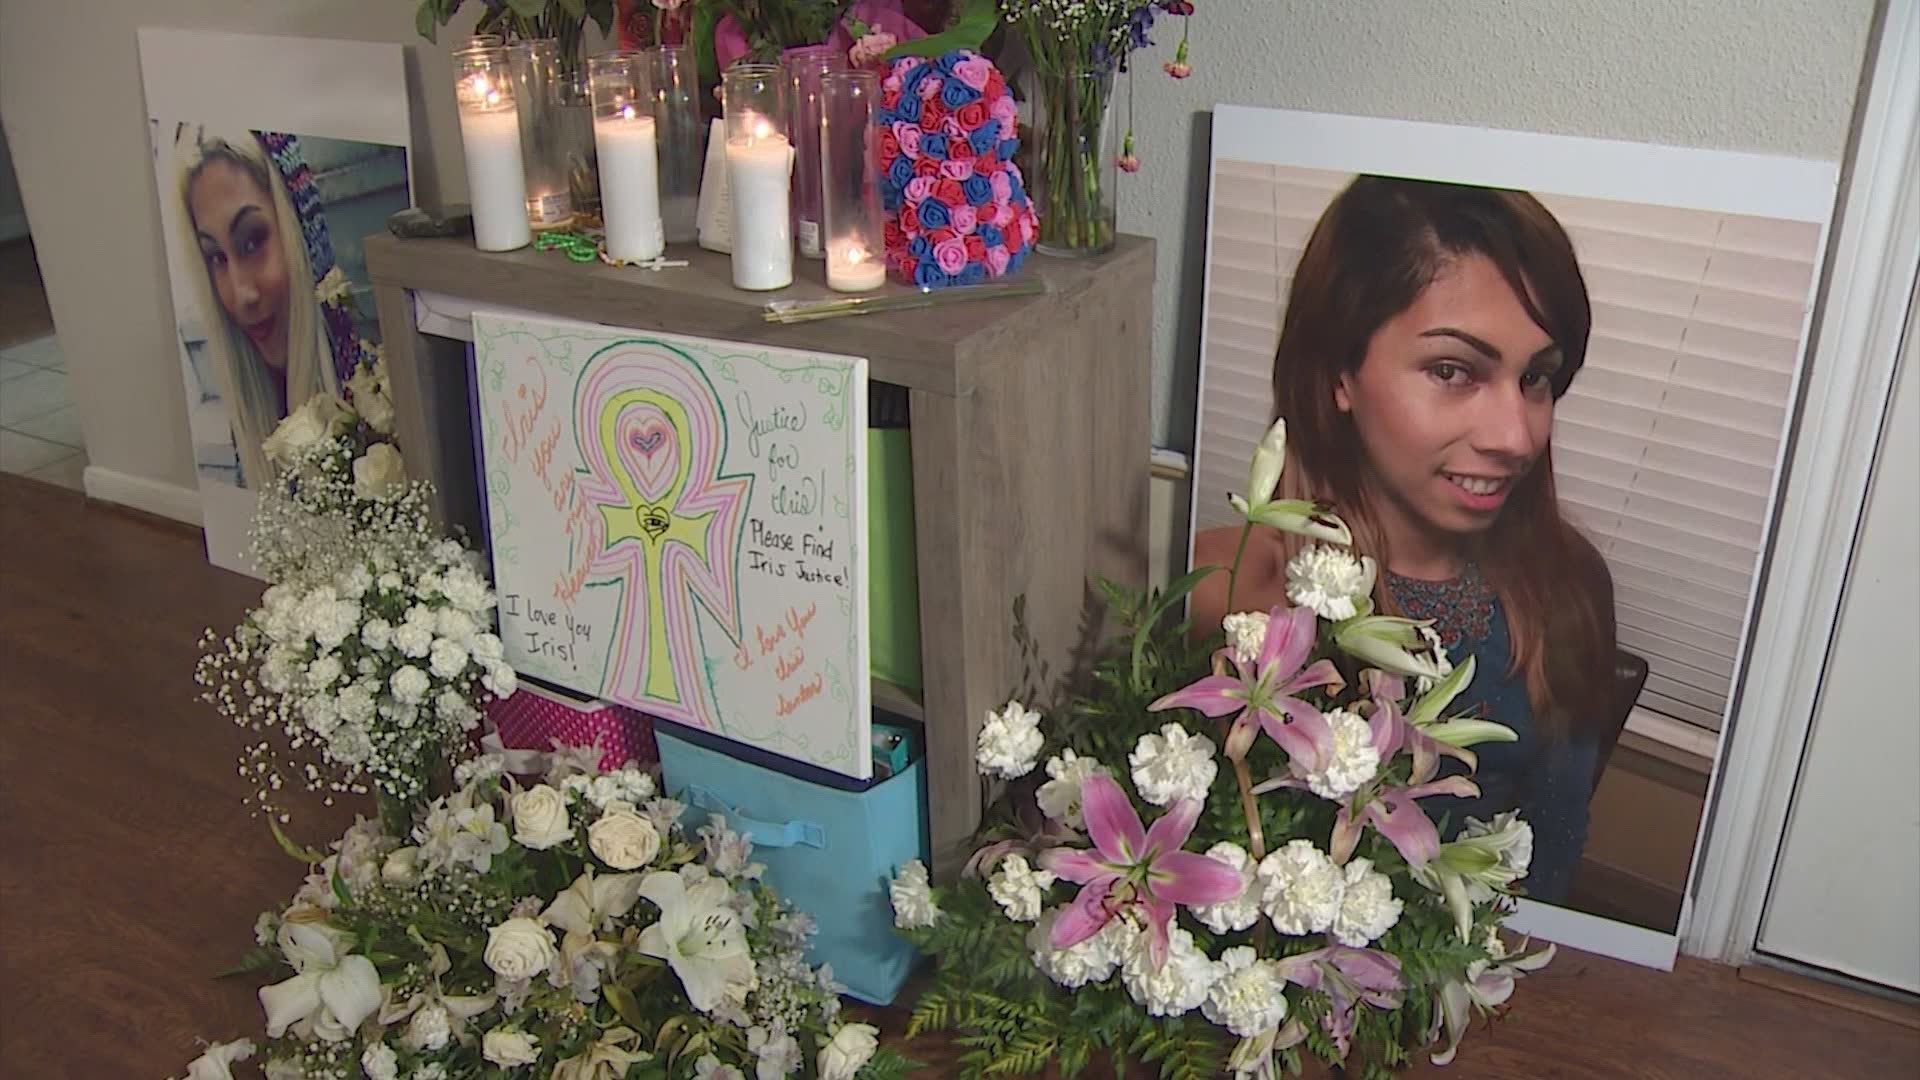 Iris Santos, 22, was shot and killed outside a southwest Houston Chick-Fil-A on April 23.